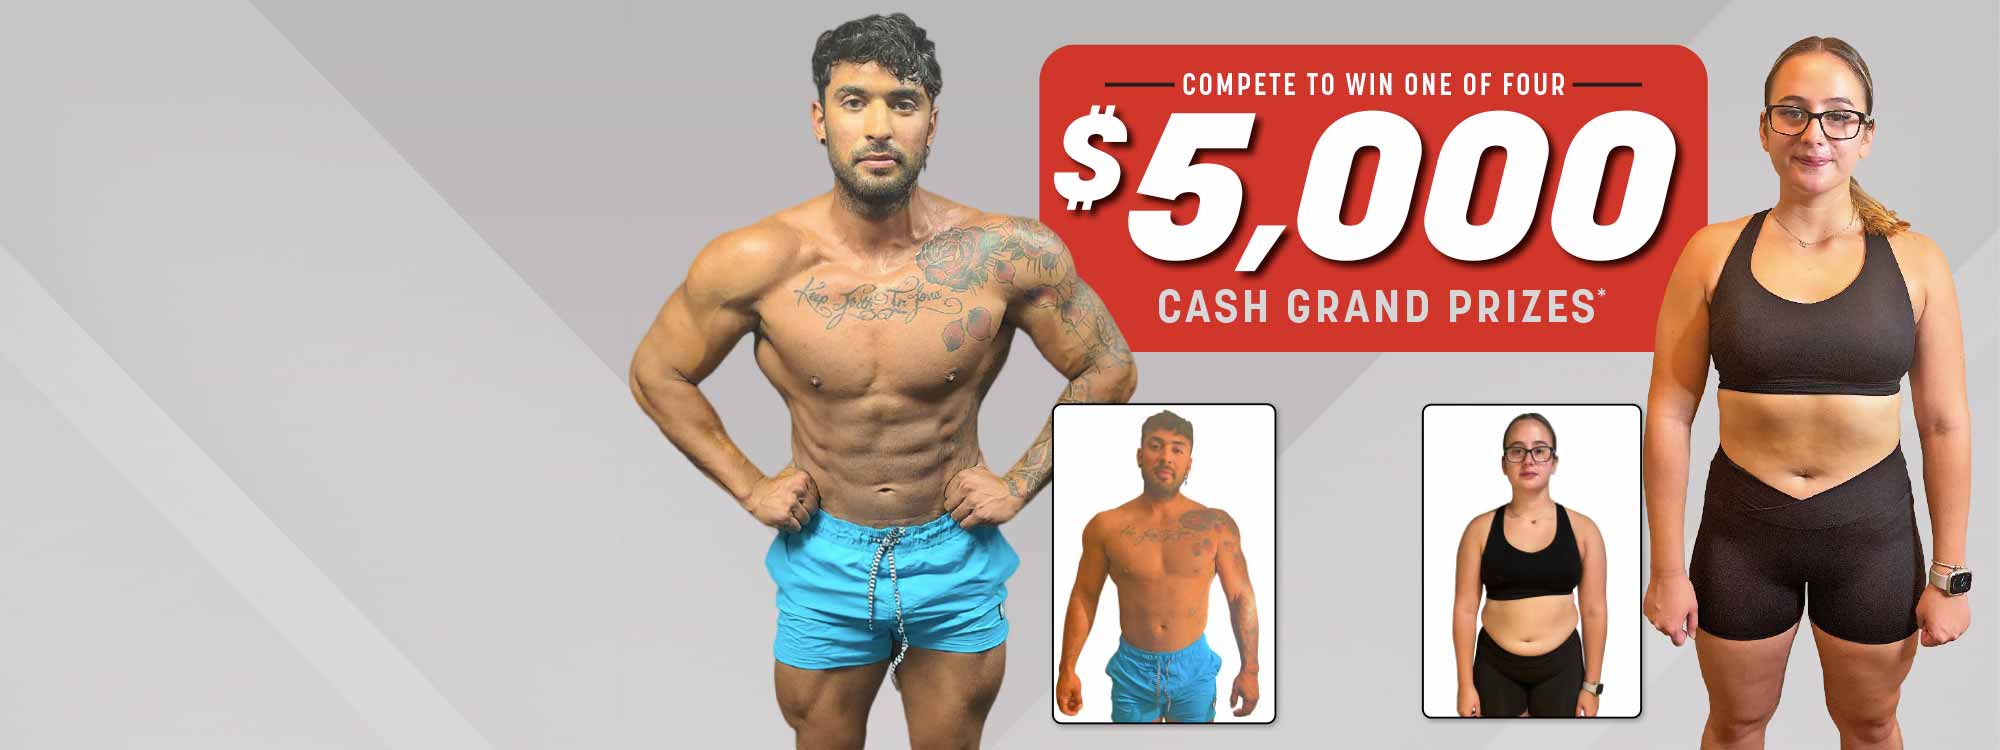 Get Fit Challenge $5,000 Prize Package